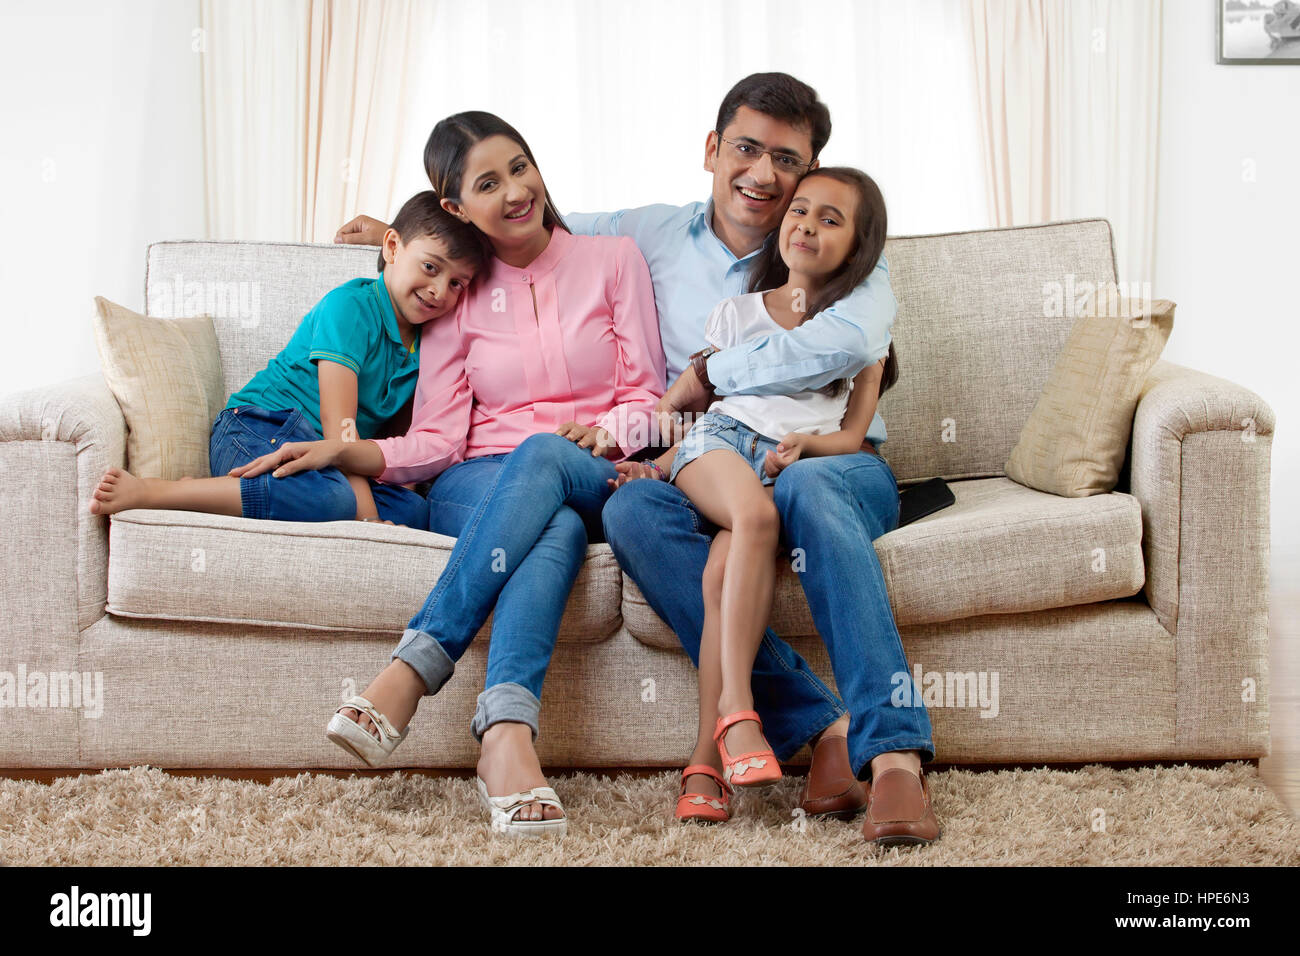 Portrait of family with two children on sofa Stock Photo